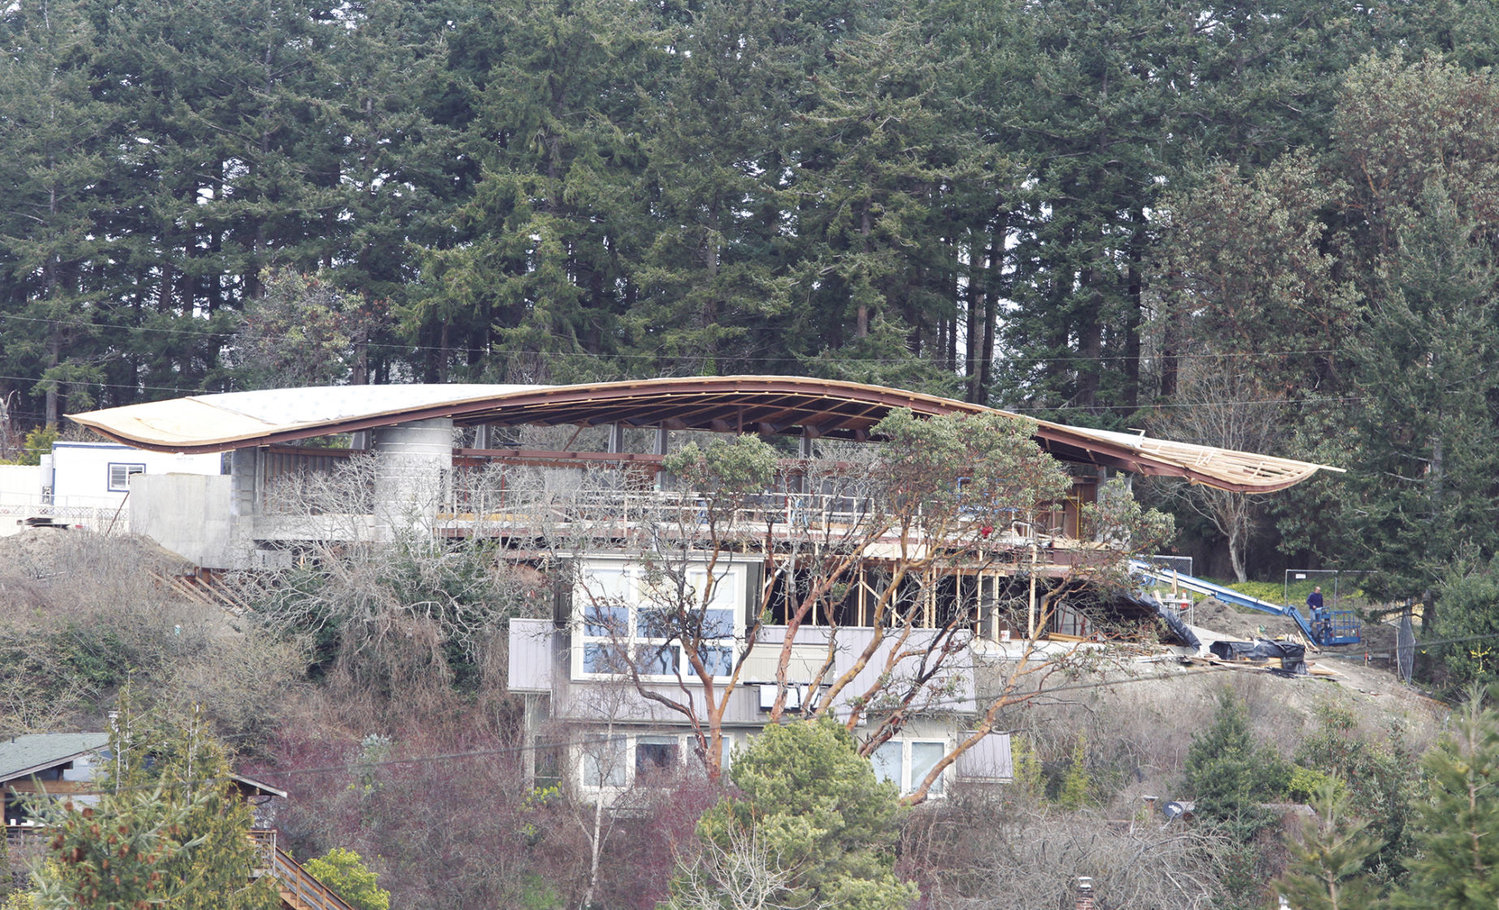 With its uniquely shaped roof, this 6,870-square-foot residence under construction on Morgan Hill’s south side is getting people’s attention. This is a view looking north from the Port Townsend High School campus. Photo by Patrick Sullivan